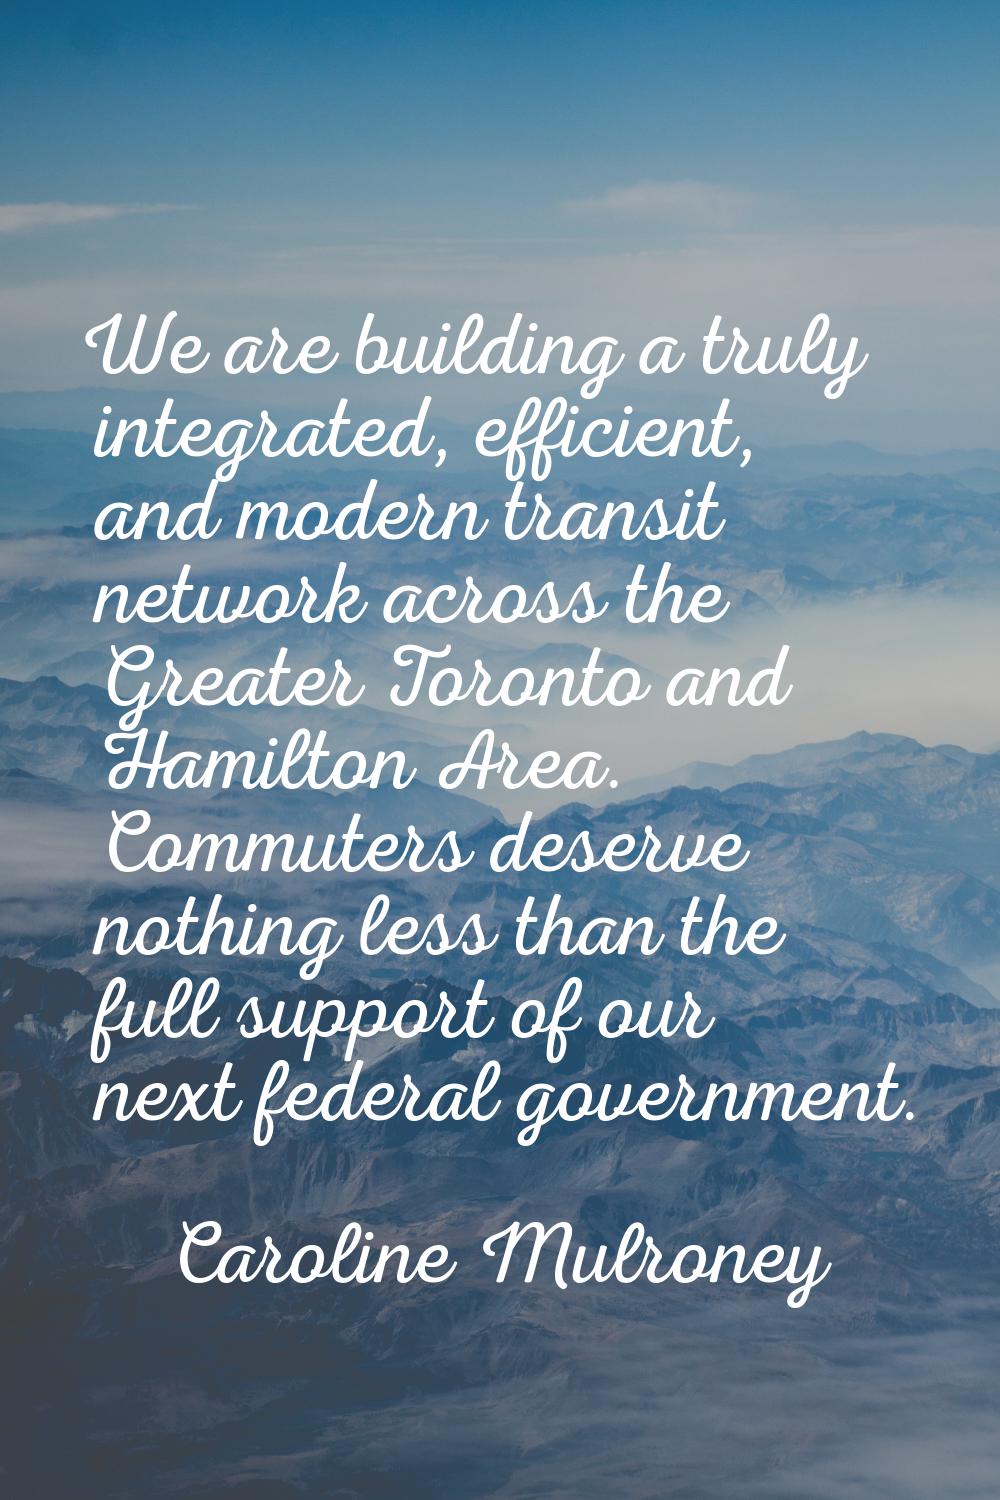 We are building a truly integrated, efficient, and modern transit network across the Greater Toront